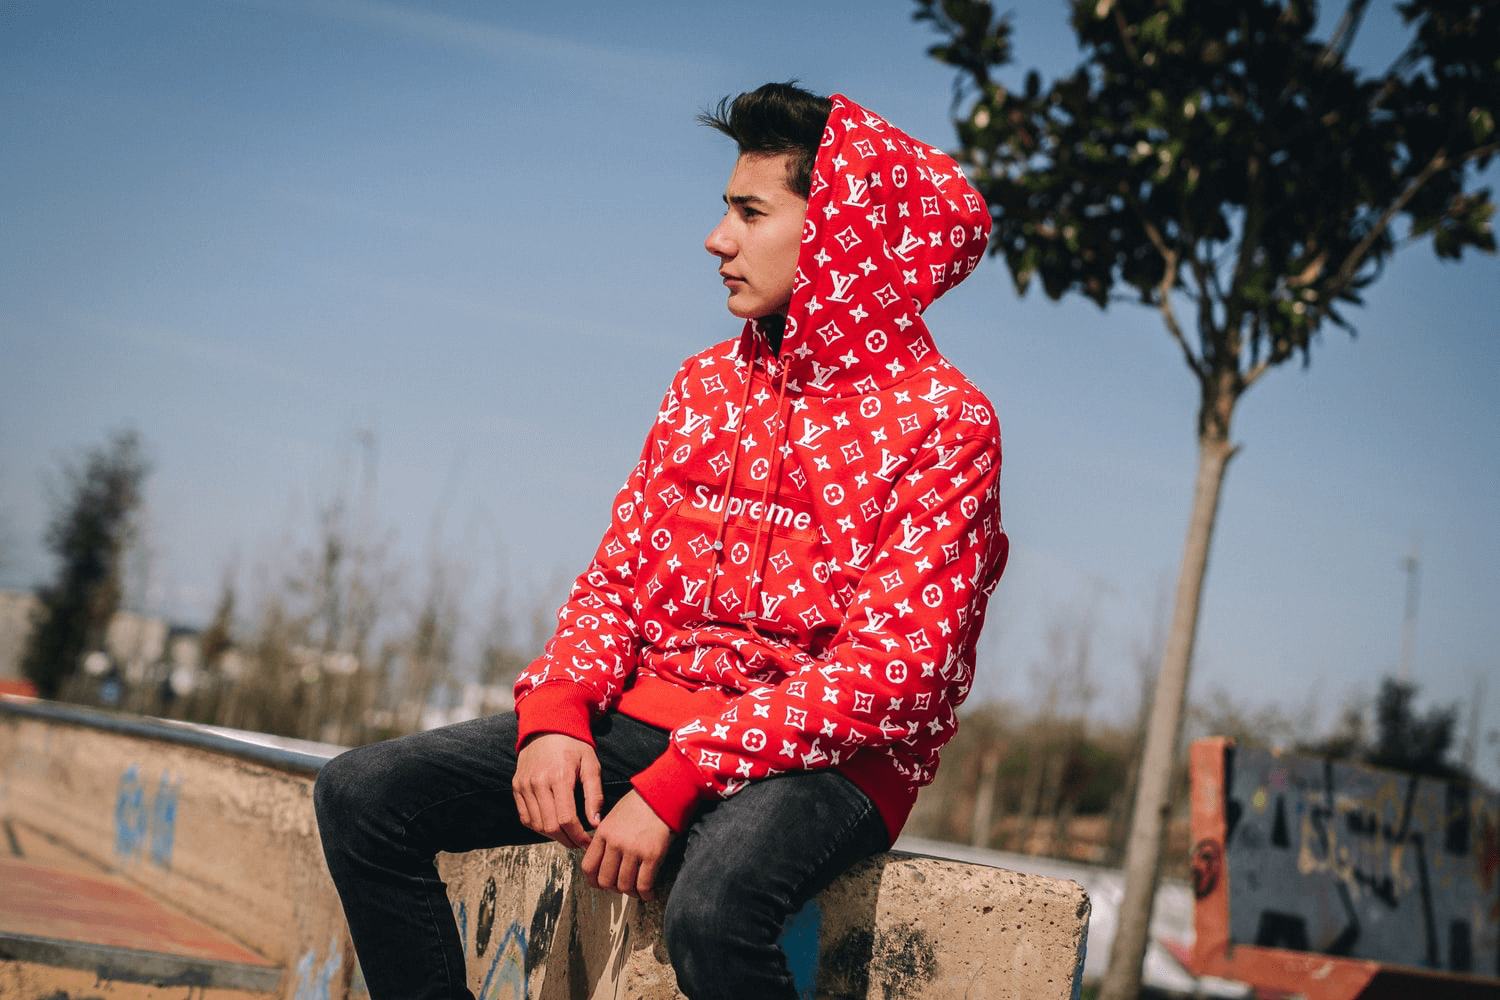 Where Does Supreme Get Their Hoodies? – Majesda